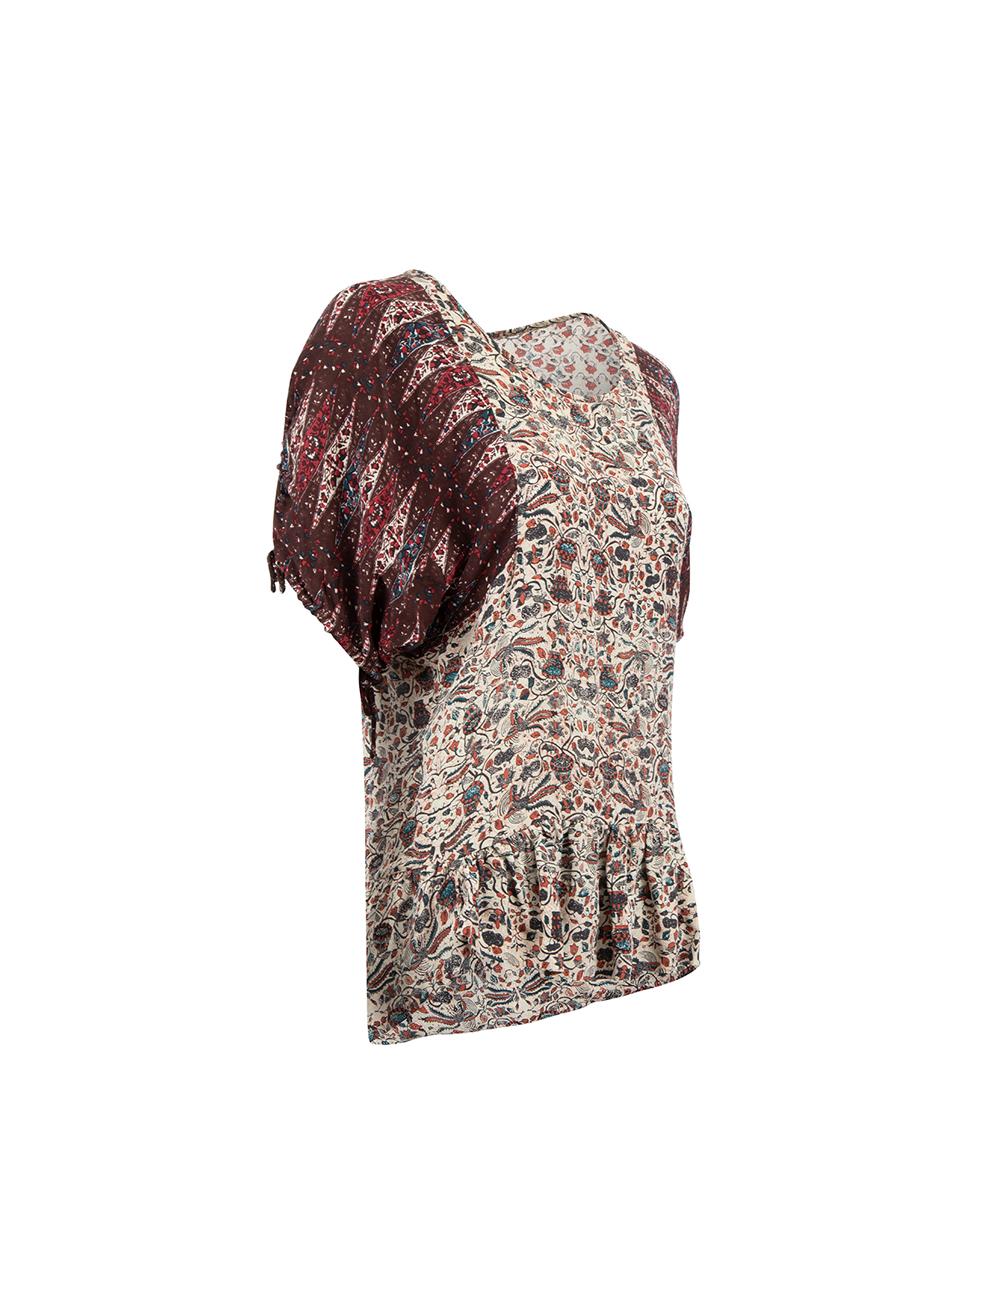 CONDITION is Very good. Hardly any visible wear to top is evident on this used Isabel Marant Étoile designer resale item. 



Details


Burgundy tone

Silk

Peplum top

Graphic printed pattern

Round neckline

Short sleeves with slit and